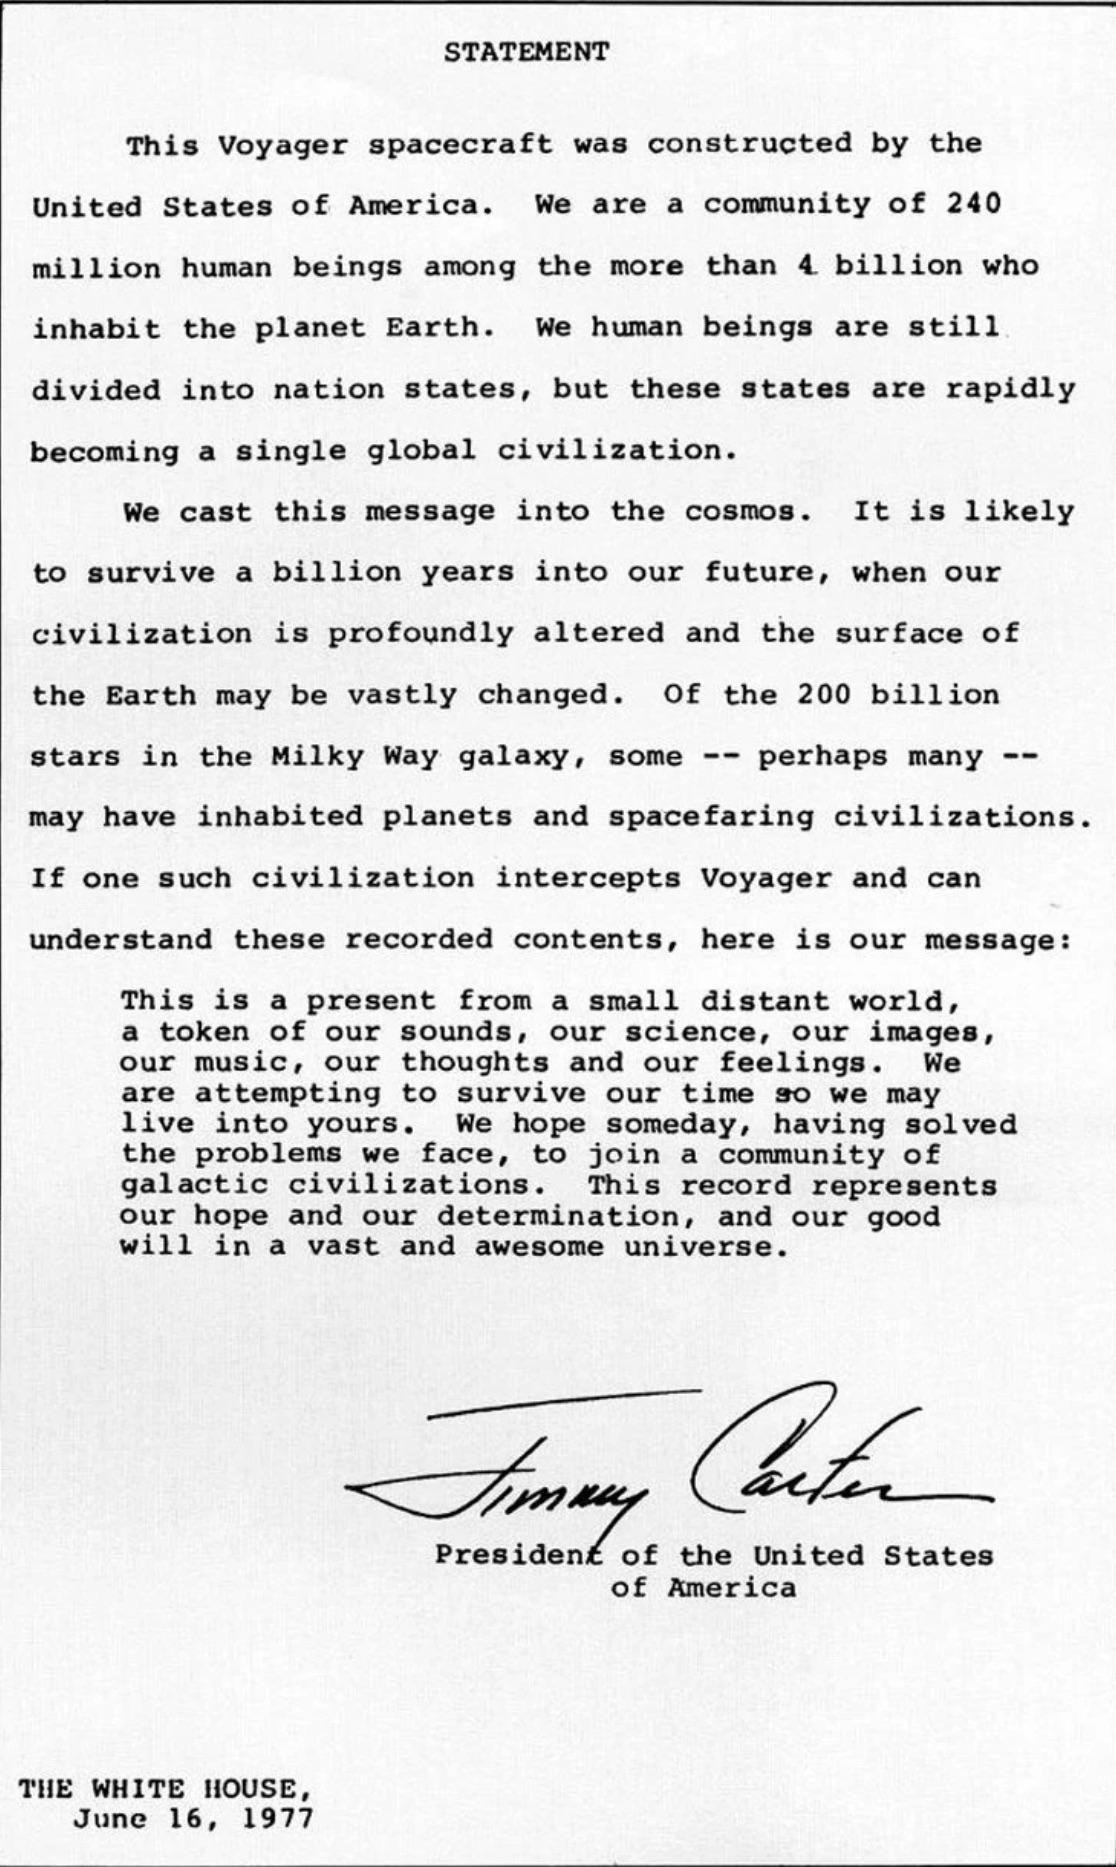 A statement from Carter dated June 16, 1977, describing the US as &quot;a community of 240 million human beings among the more than 4 billion people who inhabit the planet Earth&quot; and describes it as &quot;a present from a small, distant world&quot;